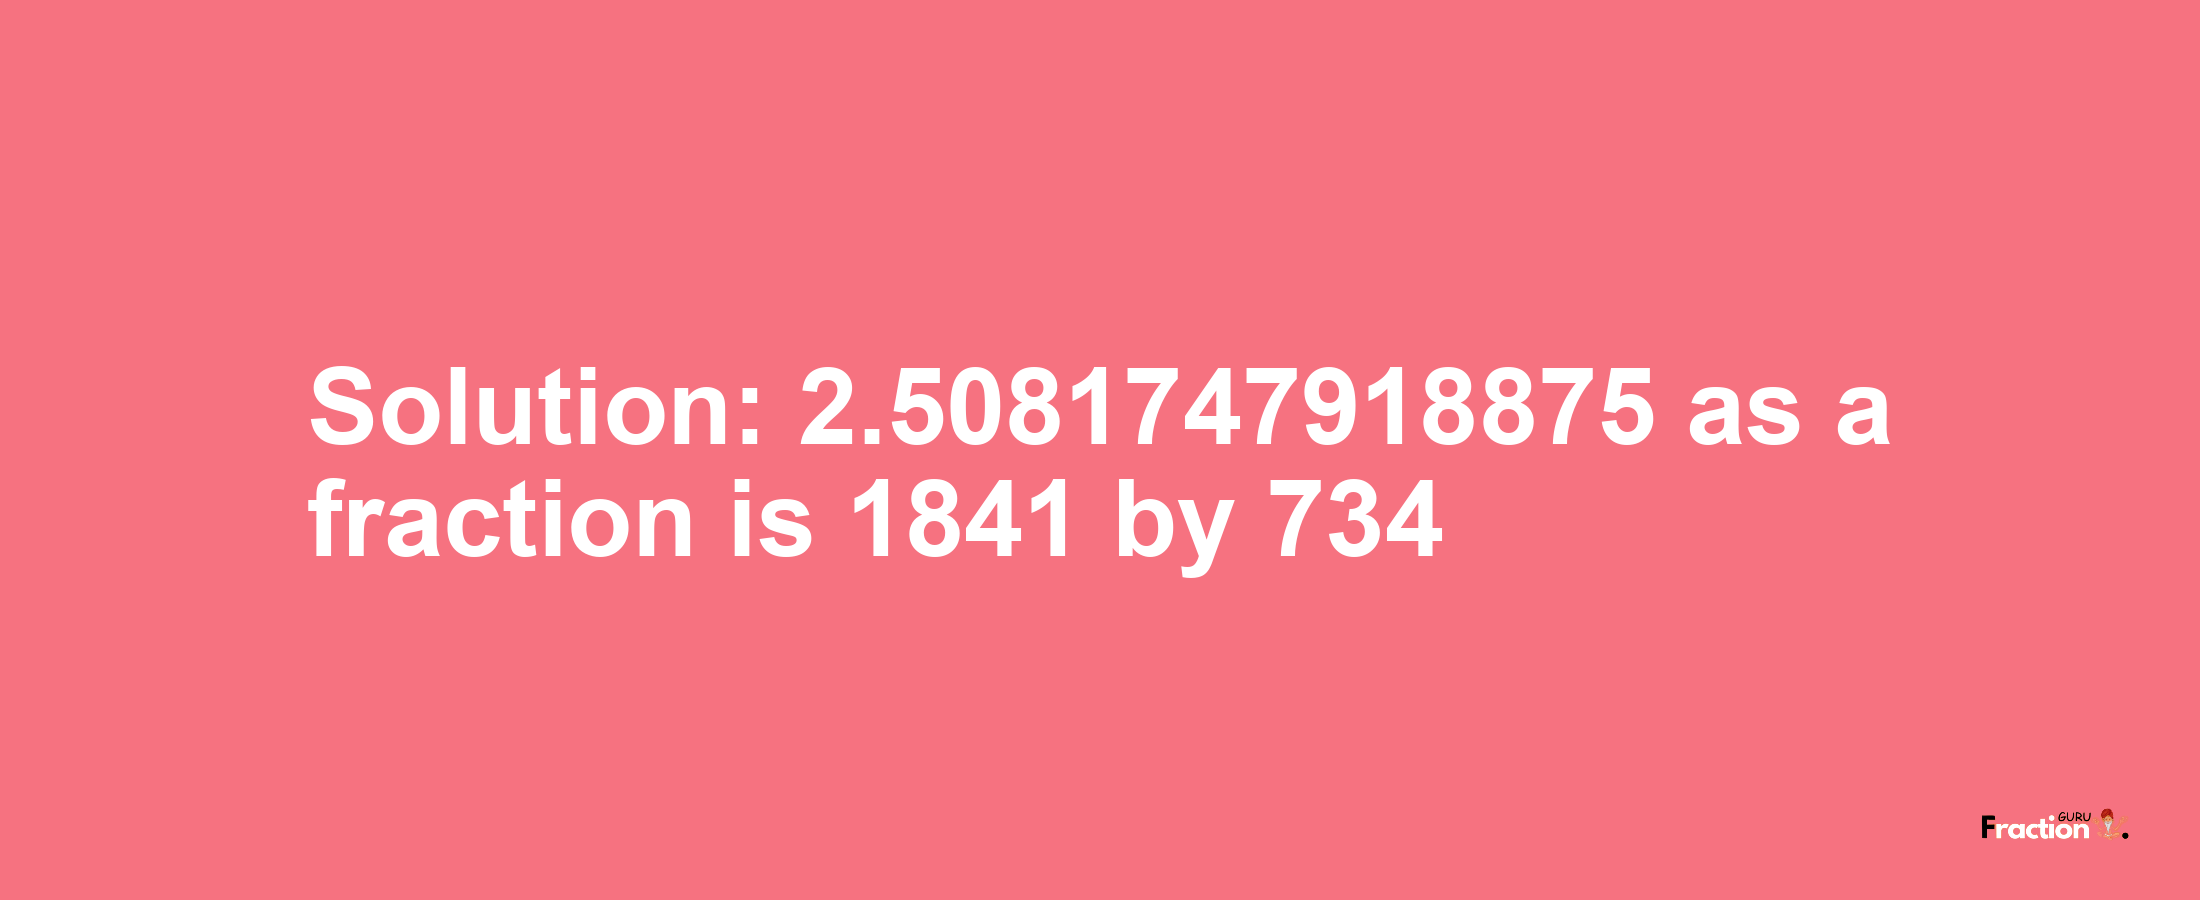 Solution:2.5081747918875 as a fraction is 1841/734